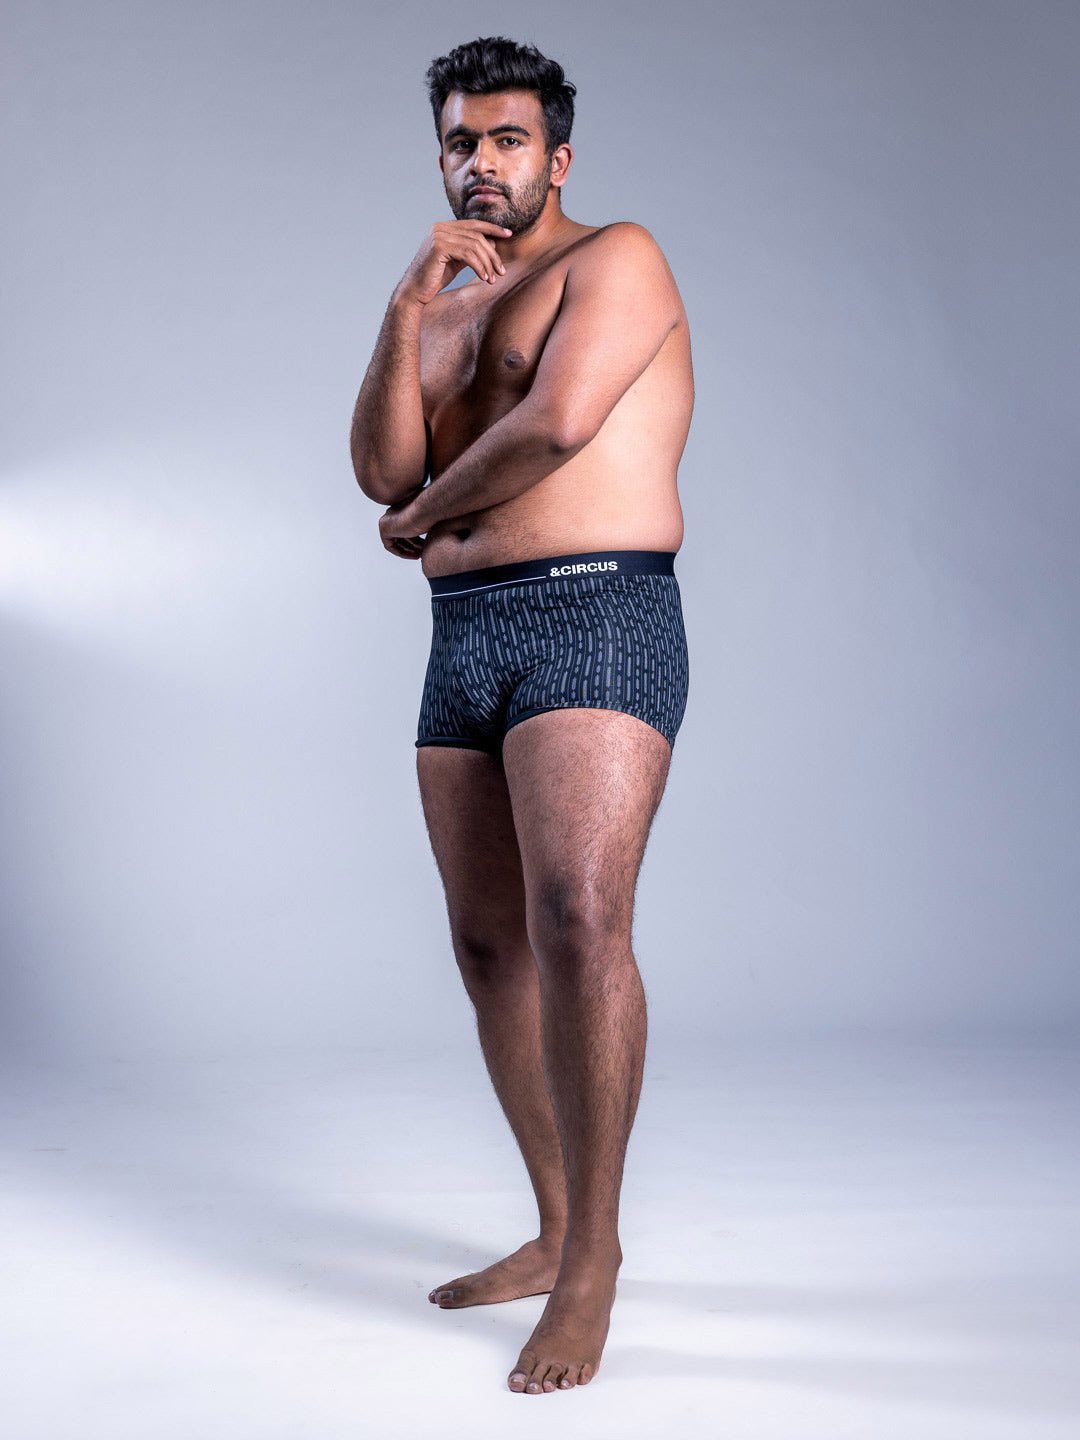 How do woman feel about men who wear mens g strings and thongs as daily  underwear? - Quora